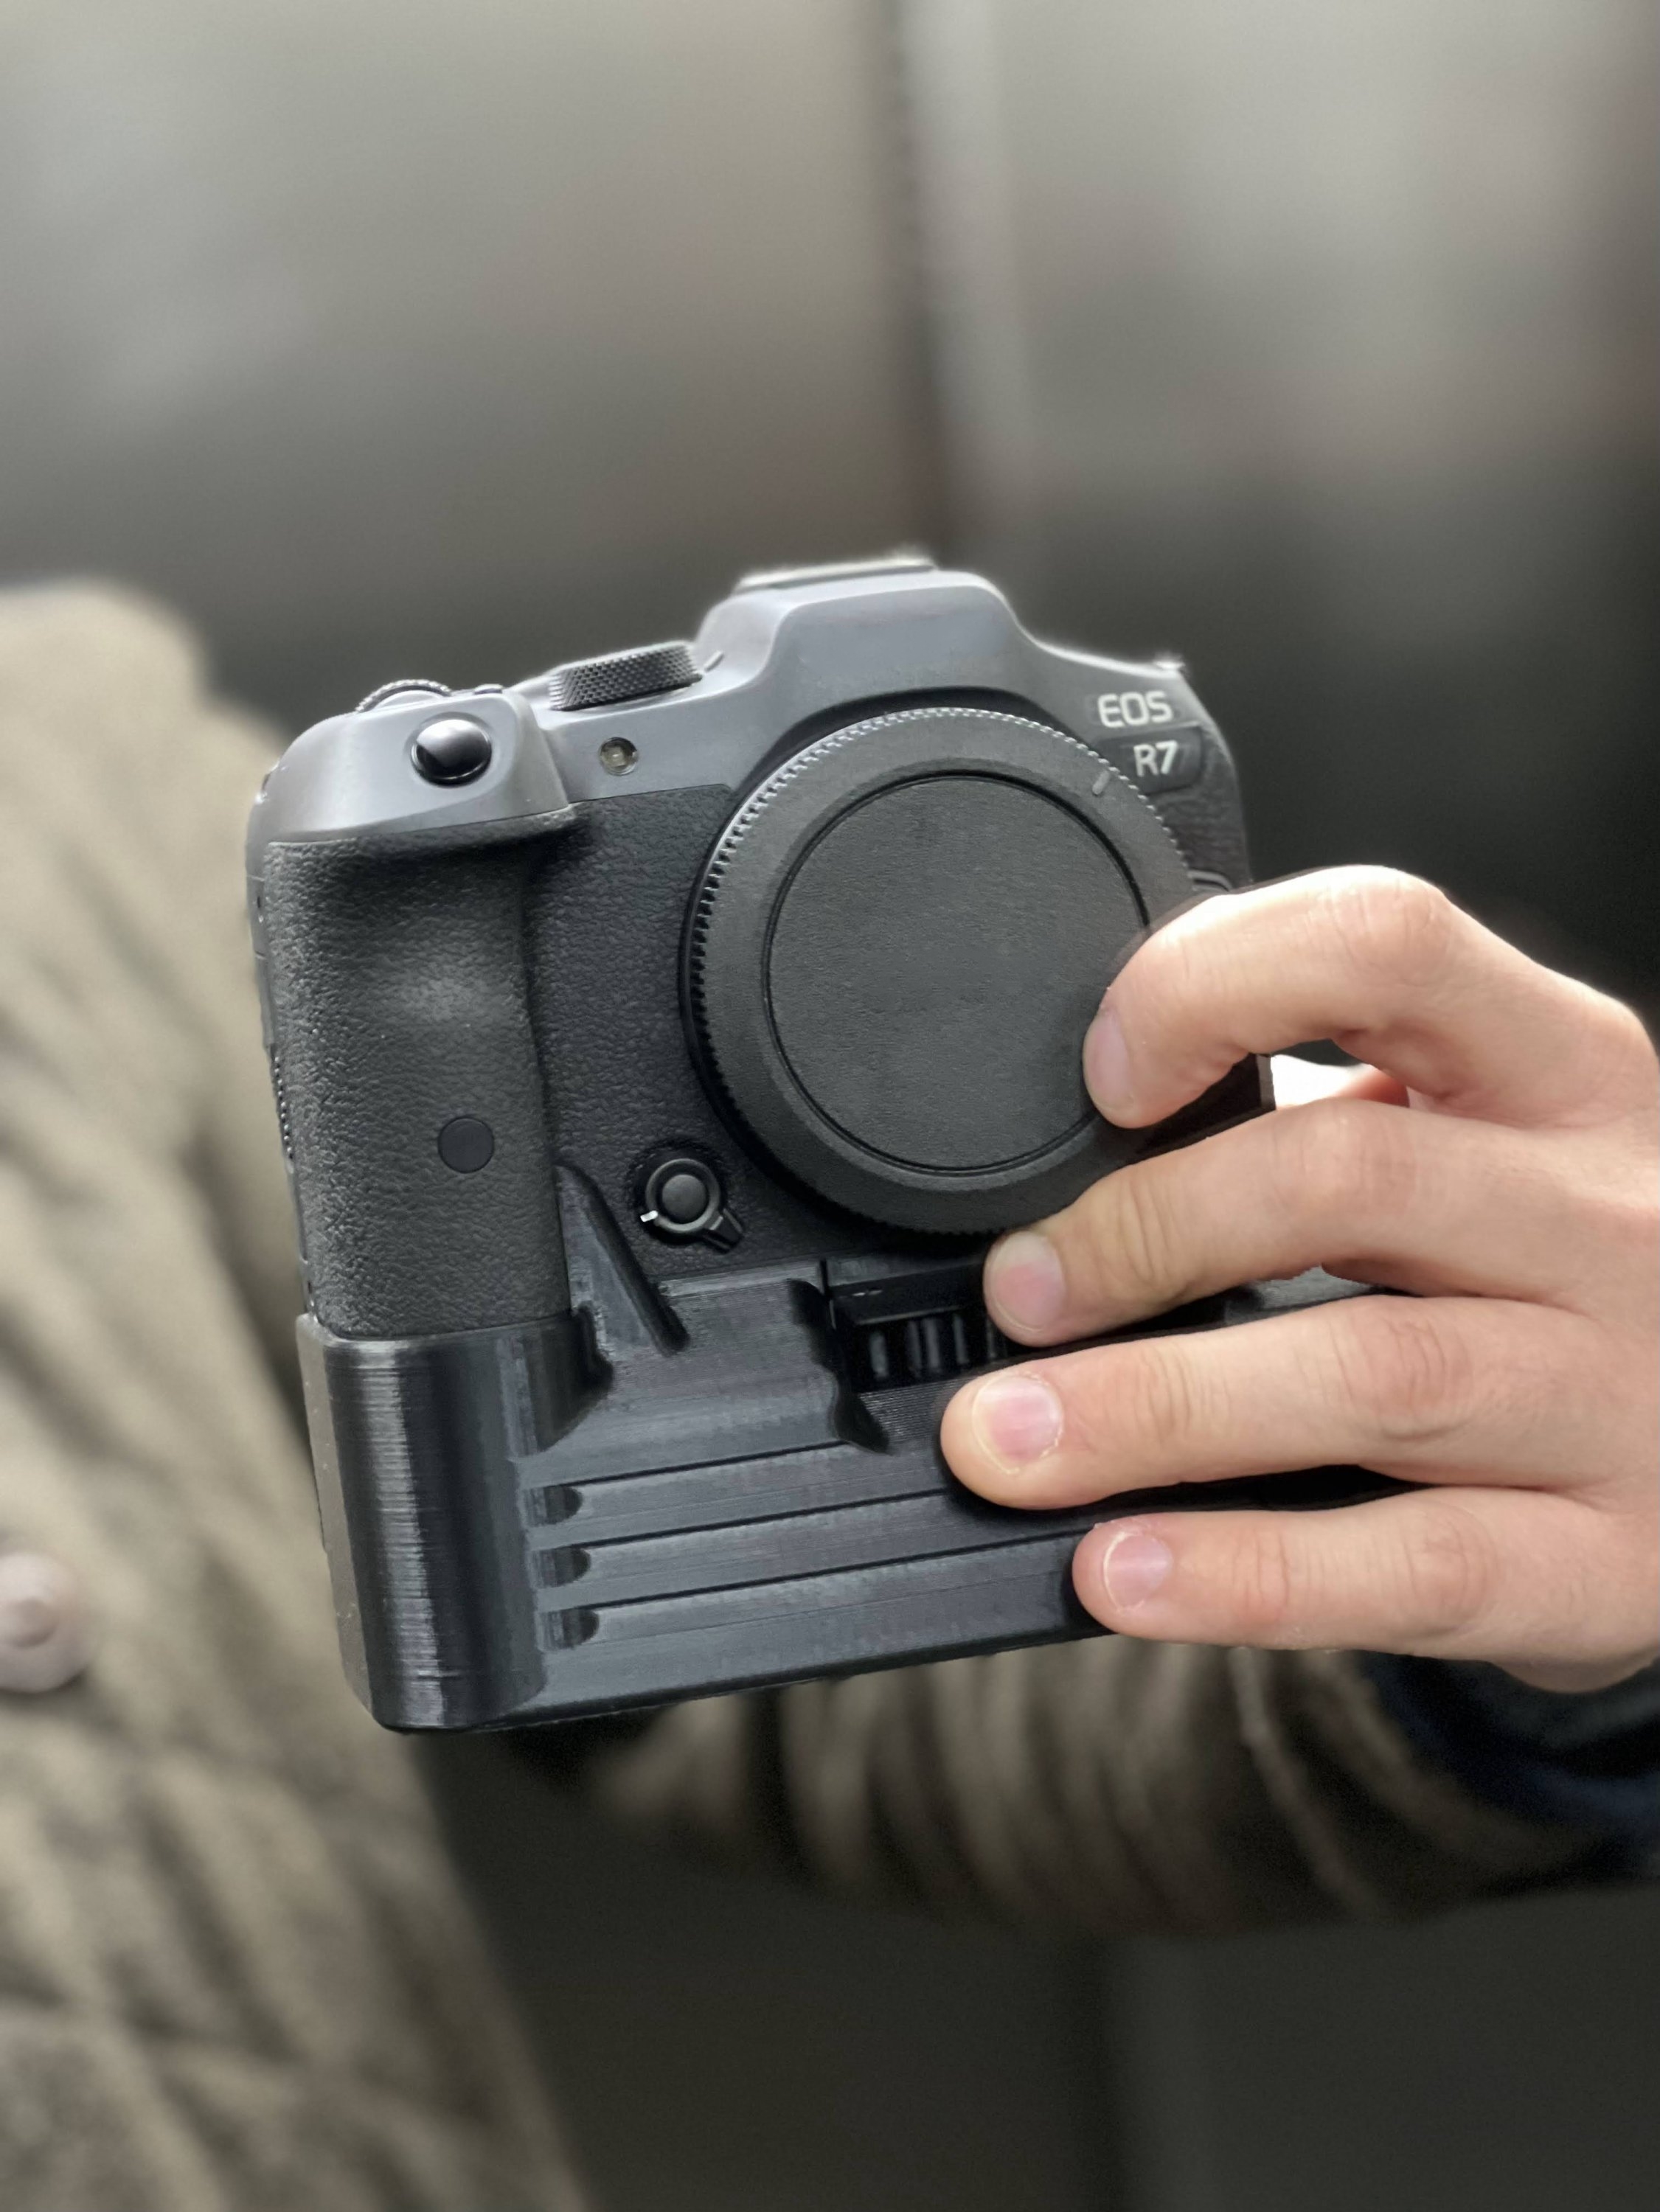 Battery Grip for Canon EOS R7 available soon